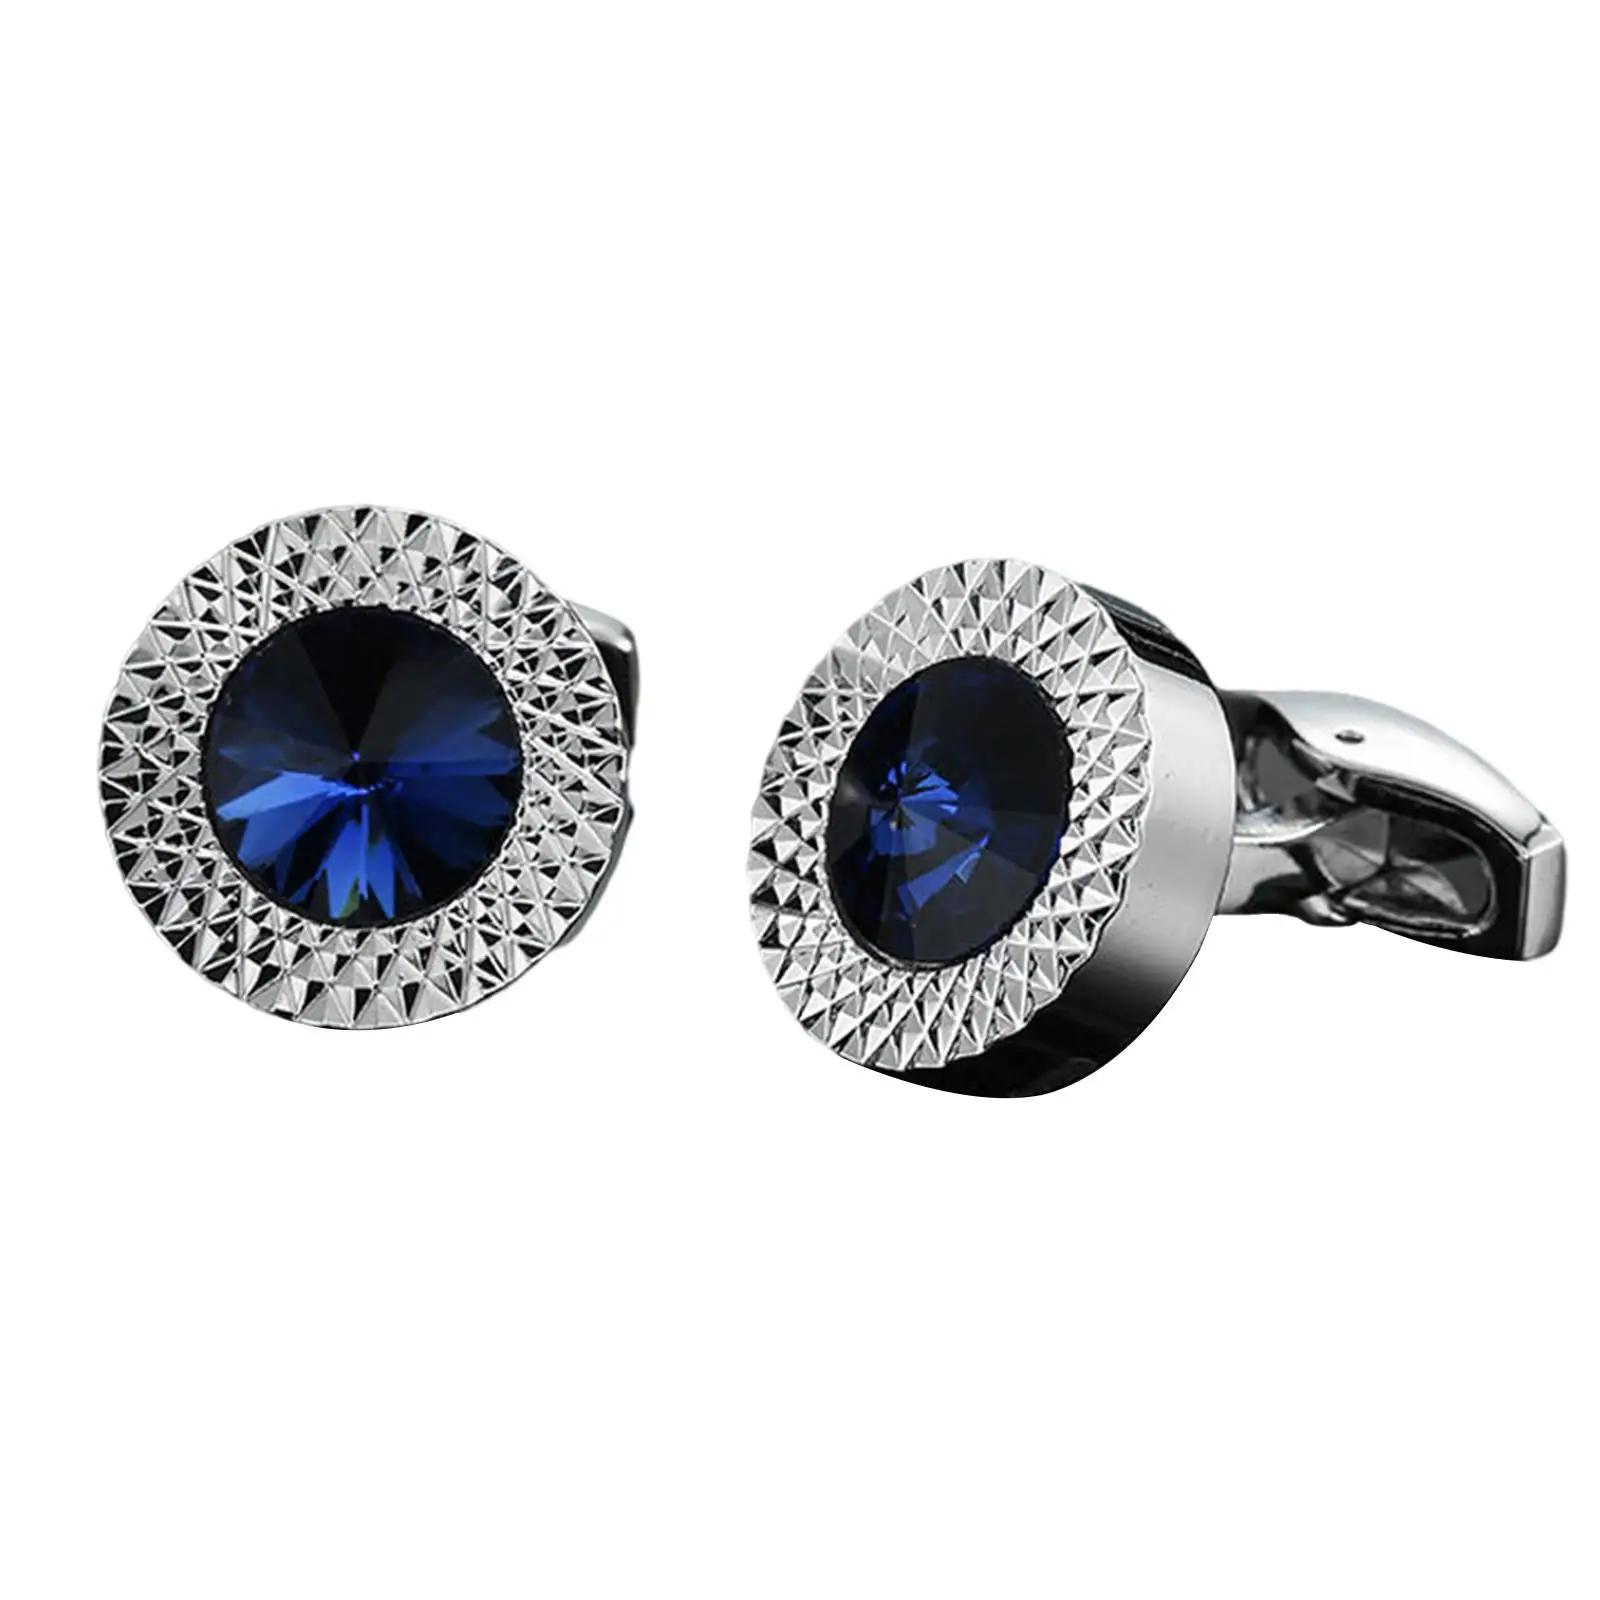 2Pcs Elegant Cufflinks Simply Business Buttons French Studs for Party Gift Wedding